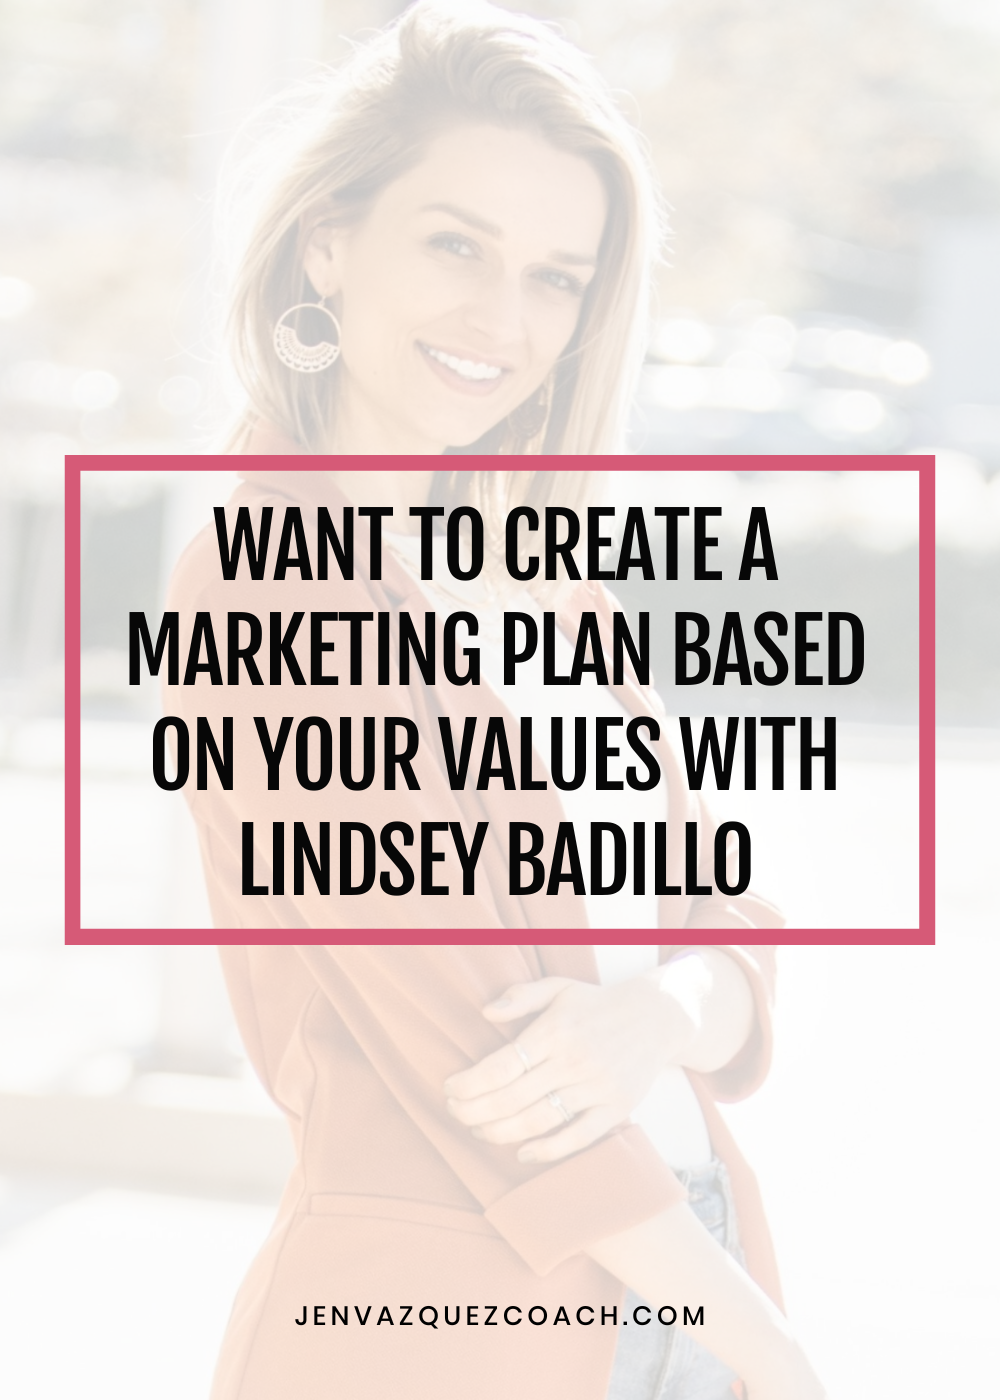 Want To Create a Marketing Plan based on your Values NOT Your Vision? with Lindsey Badillo<br />
